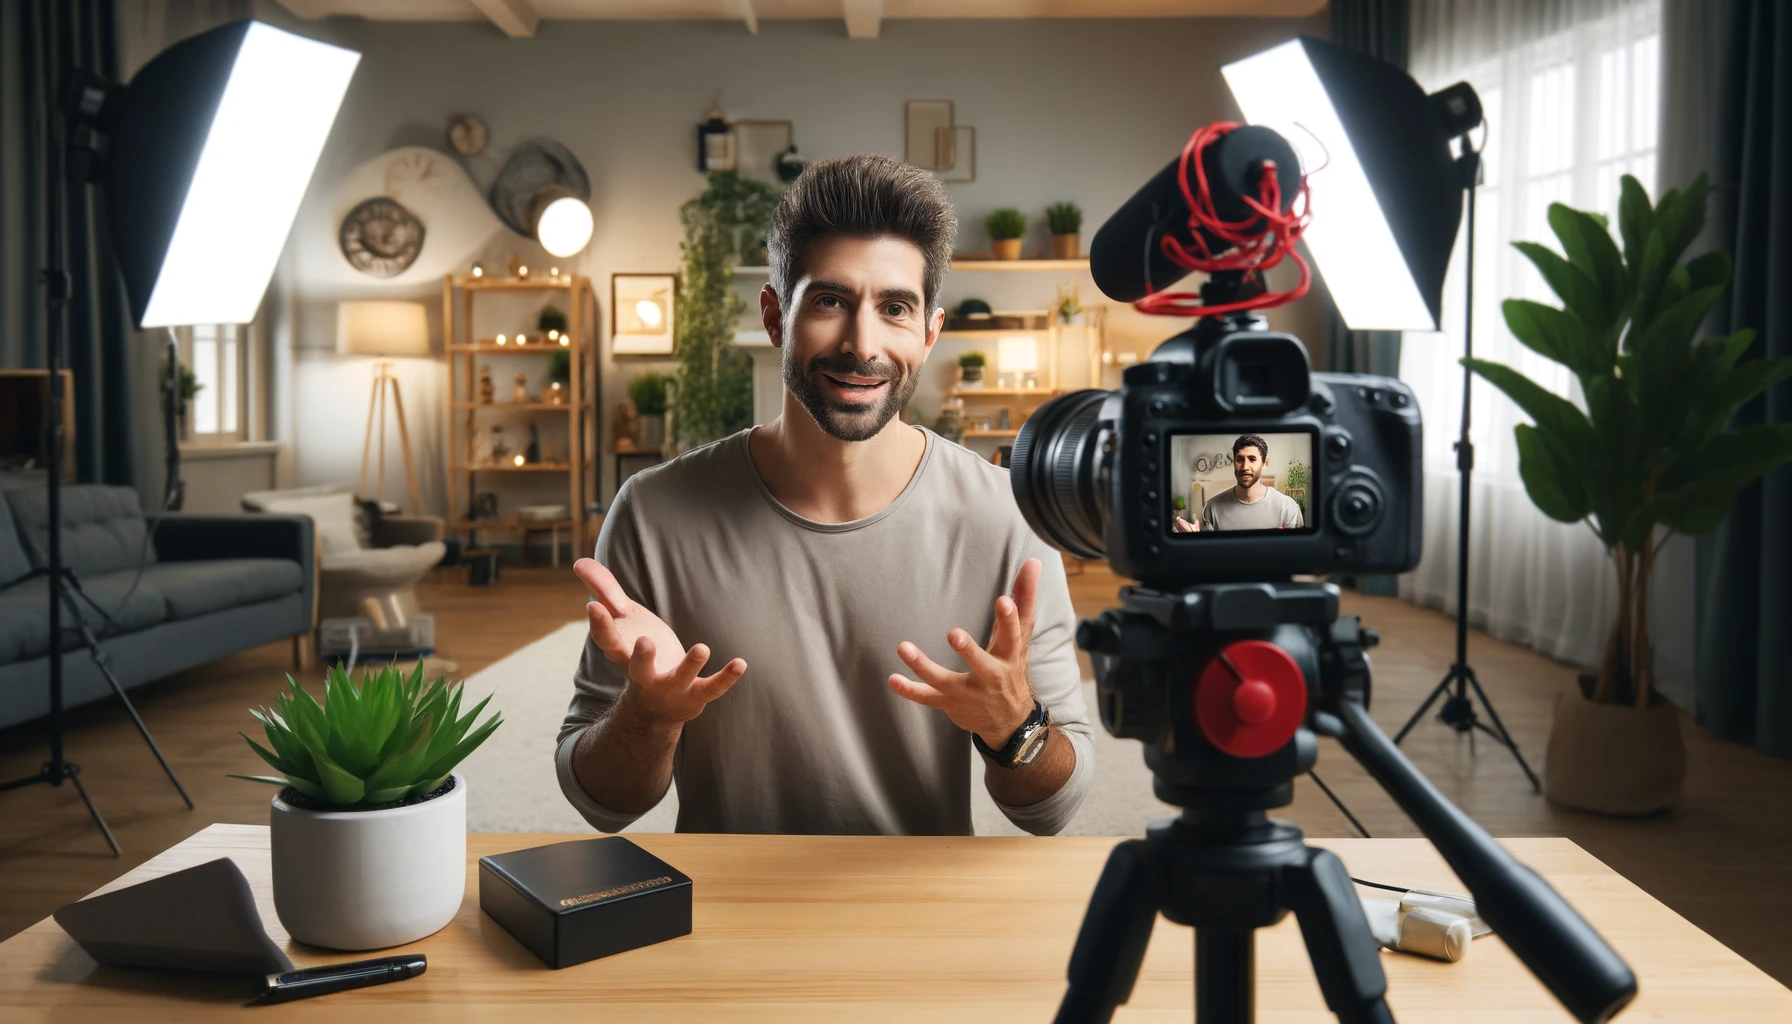 A realistic photograph of a man recording a video with a camera in a home studio. The man is speaking energetically and gesturing with his hands. The background includes professional lighting equipment, a microphone, and a tidy, modern setup with plants and decor.